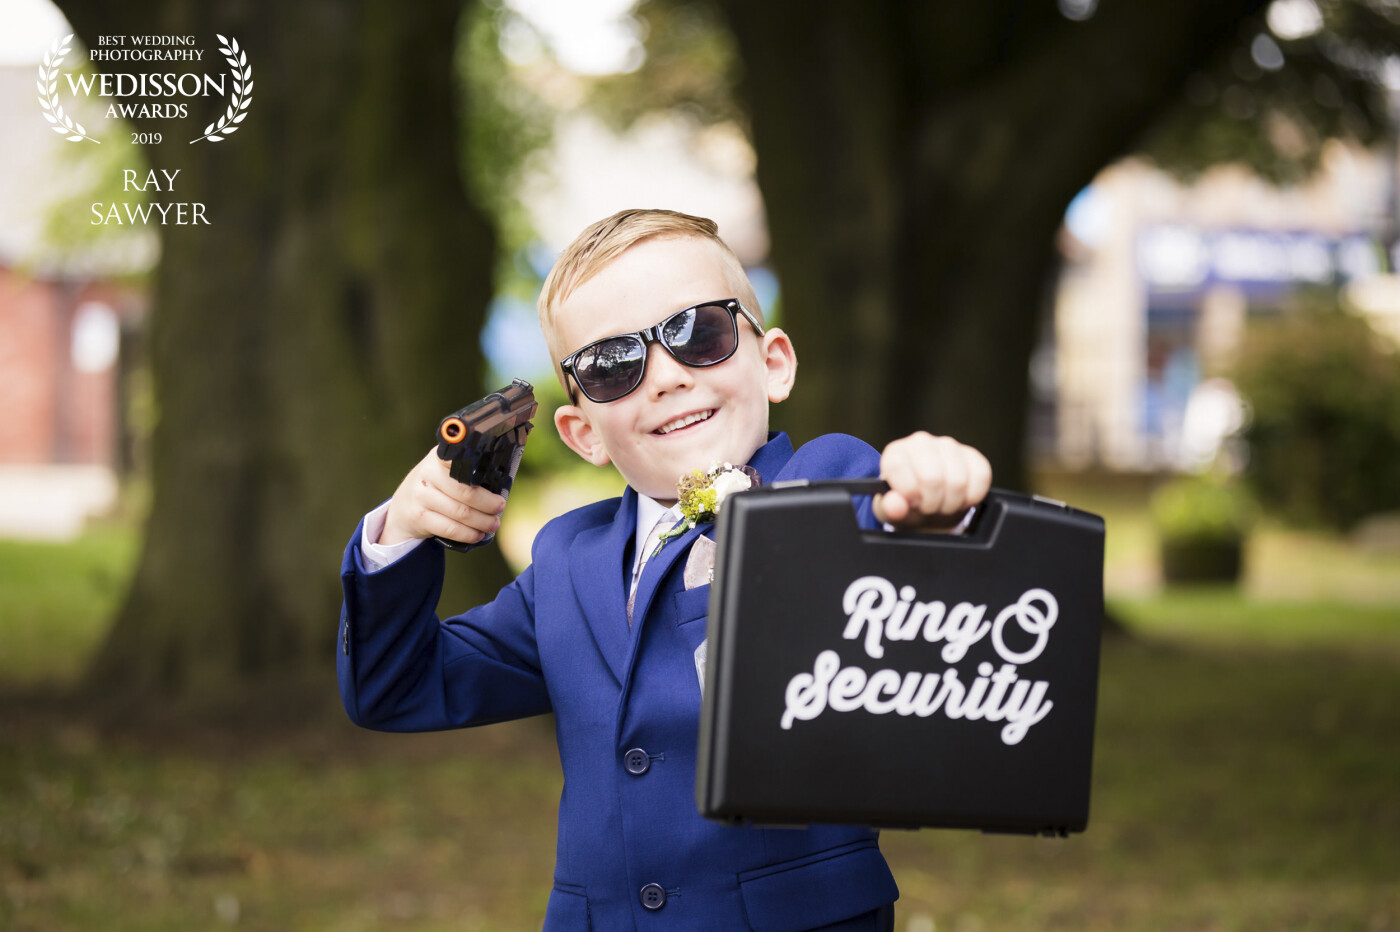 This Cheeky Chap was the ring bearer at the wedding of Michael and Leanne, held at Shildon Civic in County Durham. Their Son was so cute with the ring security briefcase, gun, id badge, glasses. 